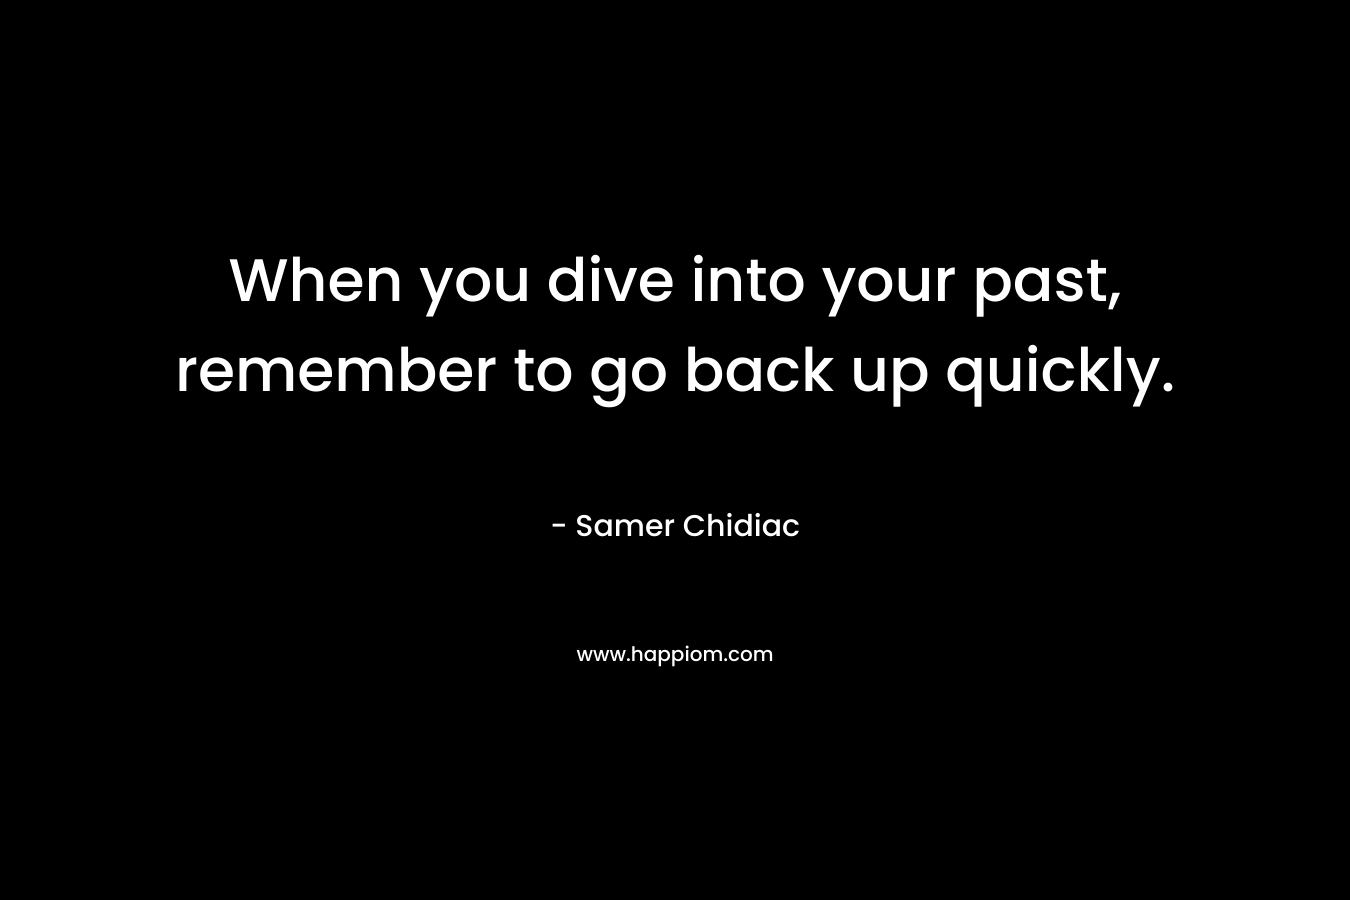 When you dive into your past, remember to go back up quickly. – Samer Chidiac